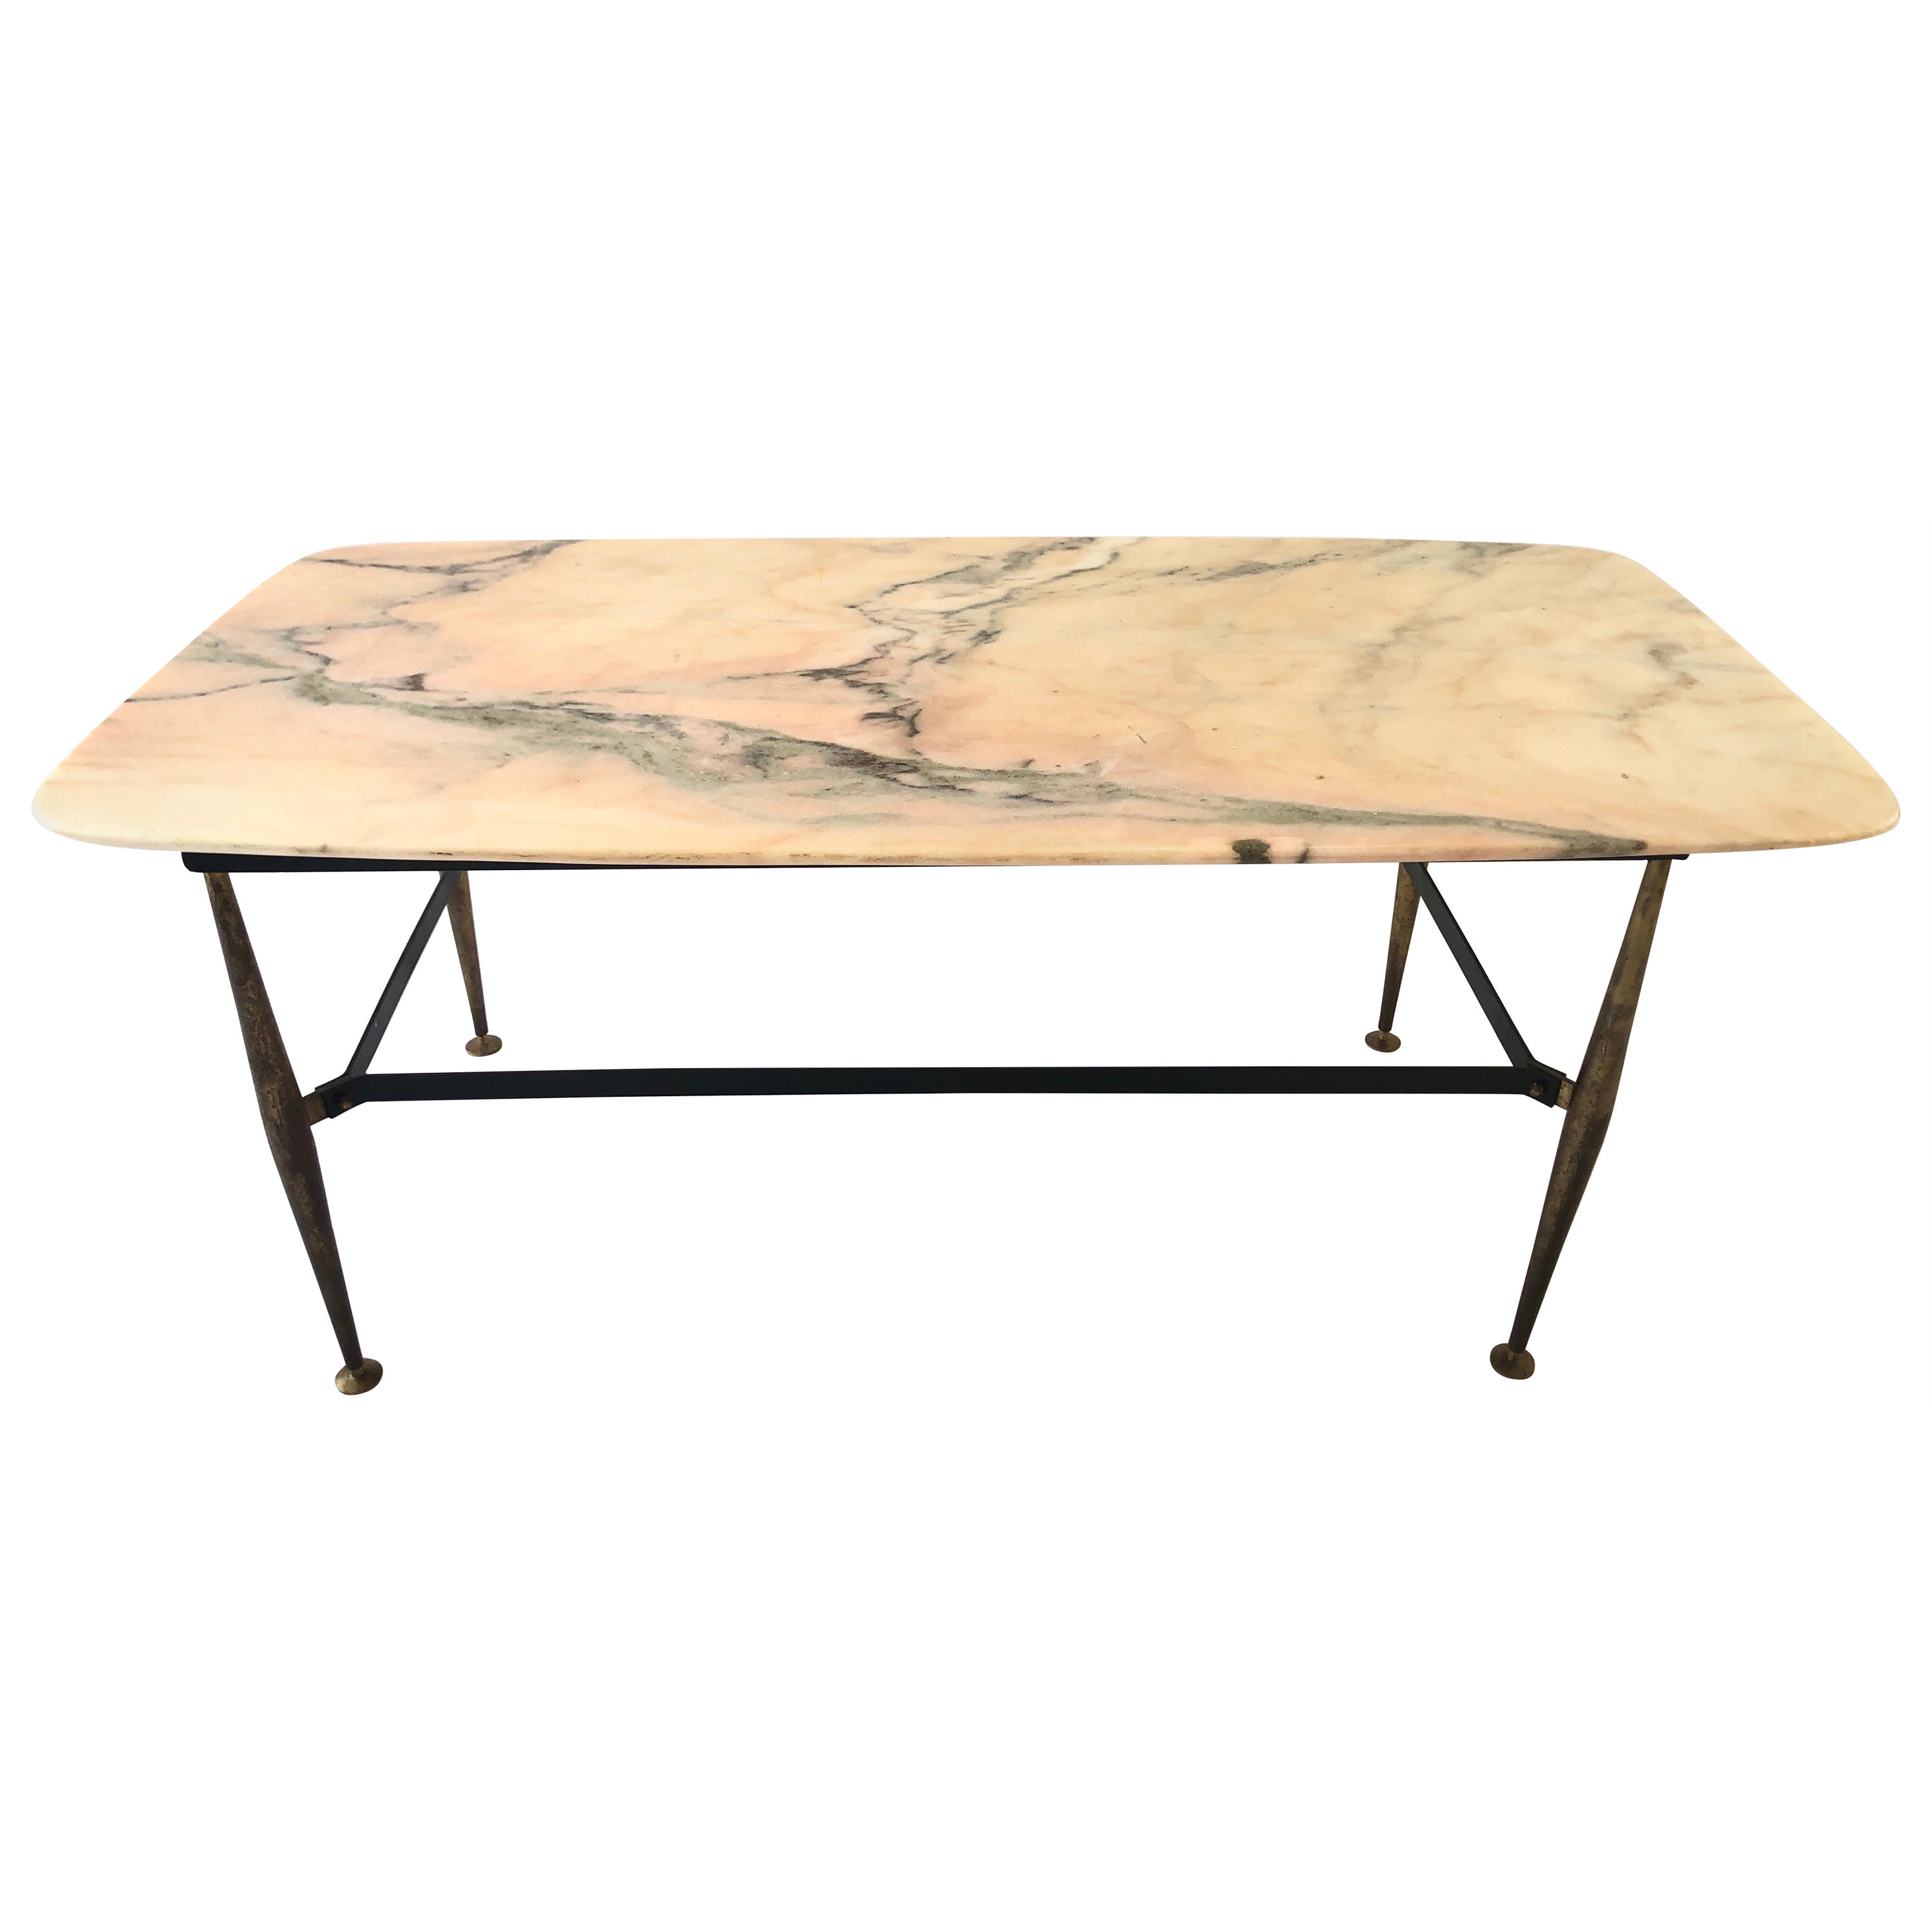 Mid-century Italian Marble Coffee Table with Brass Legs, 1960s, Italy For Sale